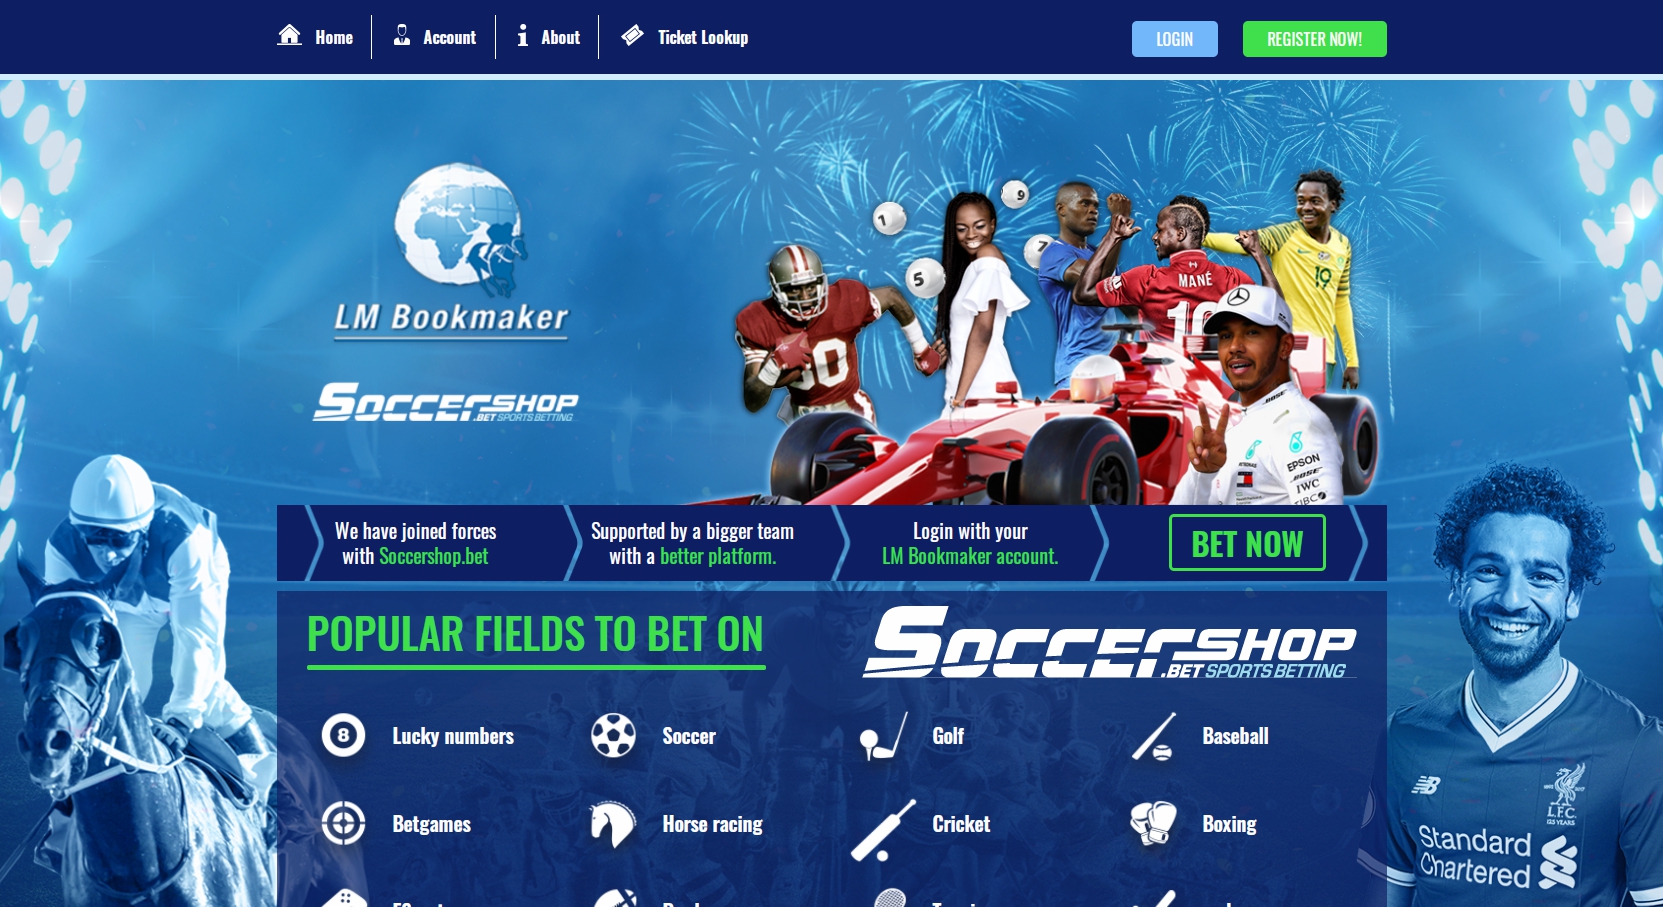 LM Bookmaker Casino Review